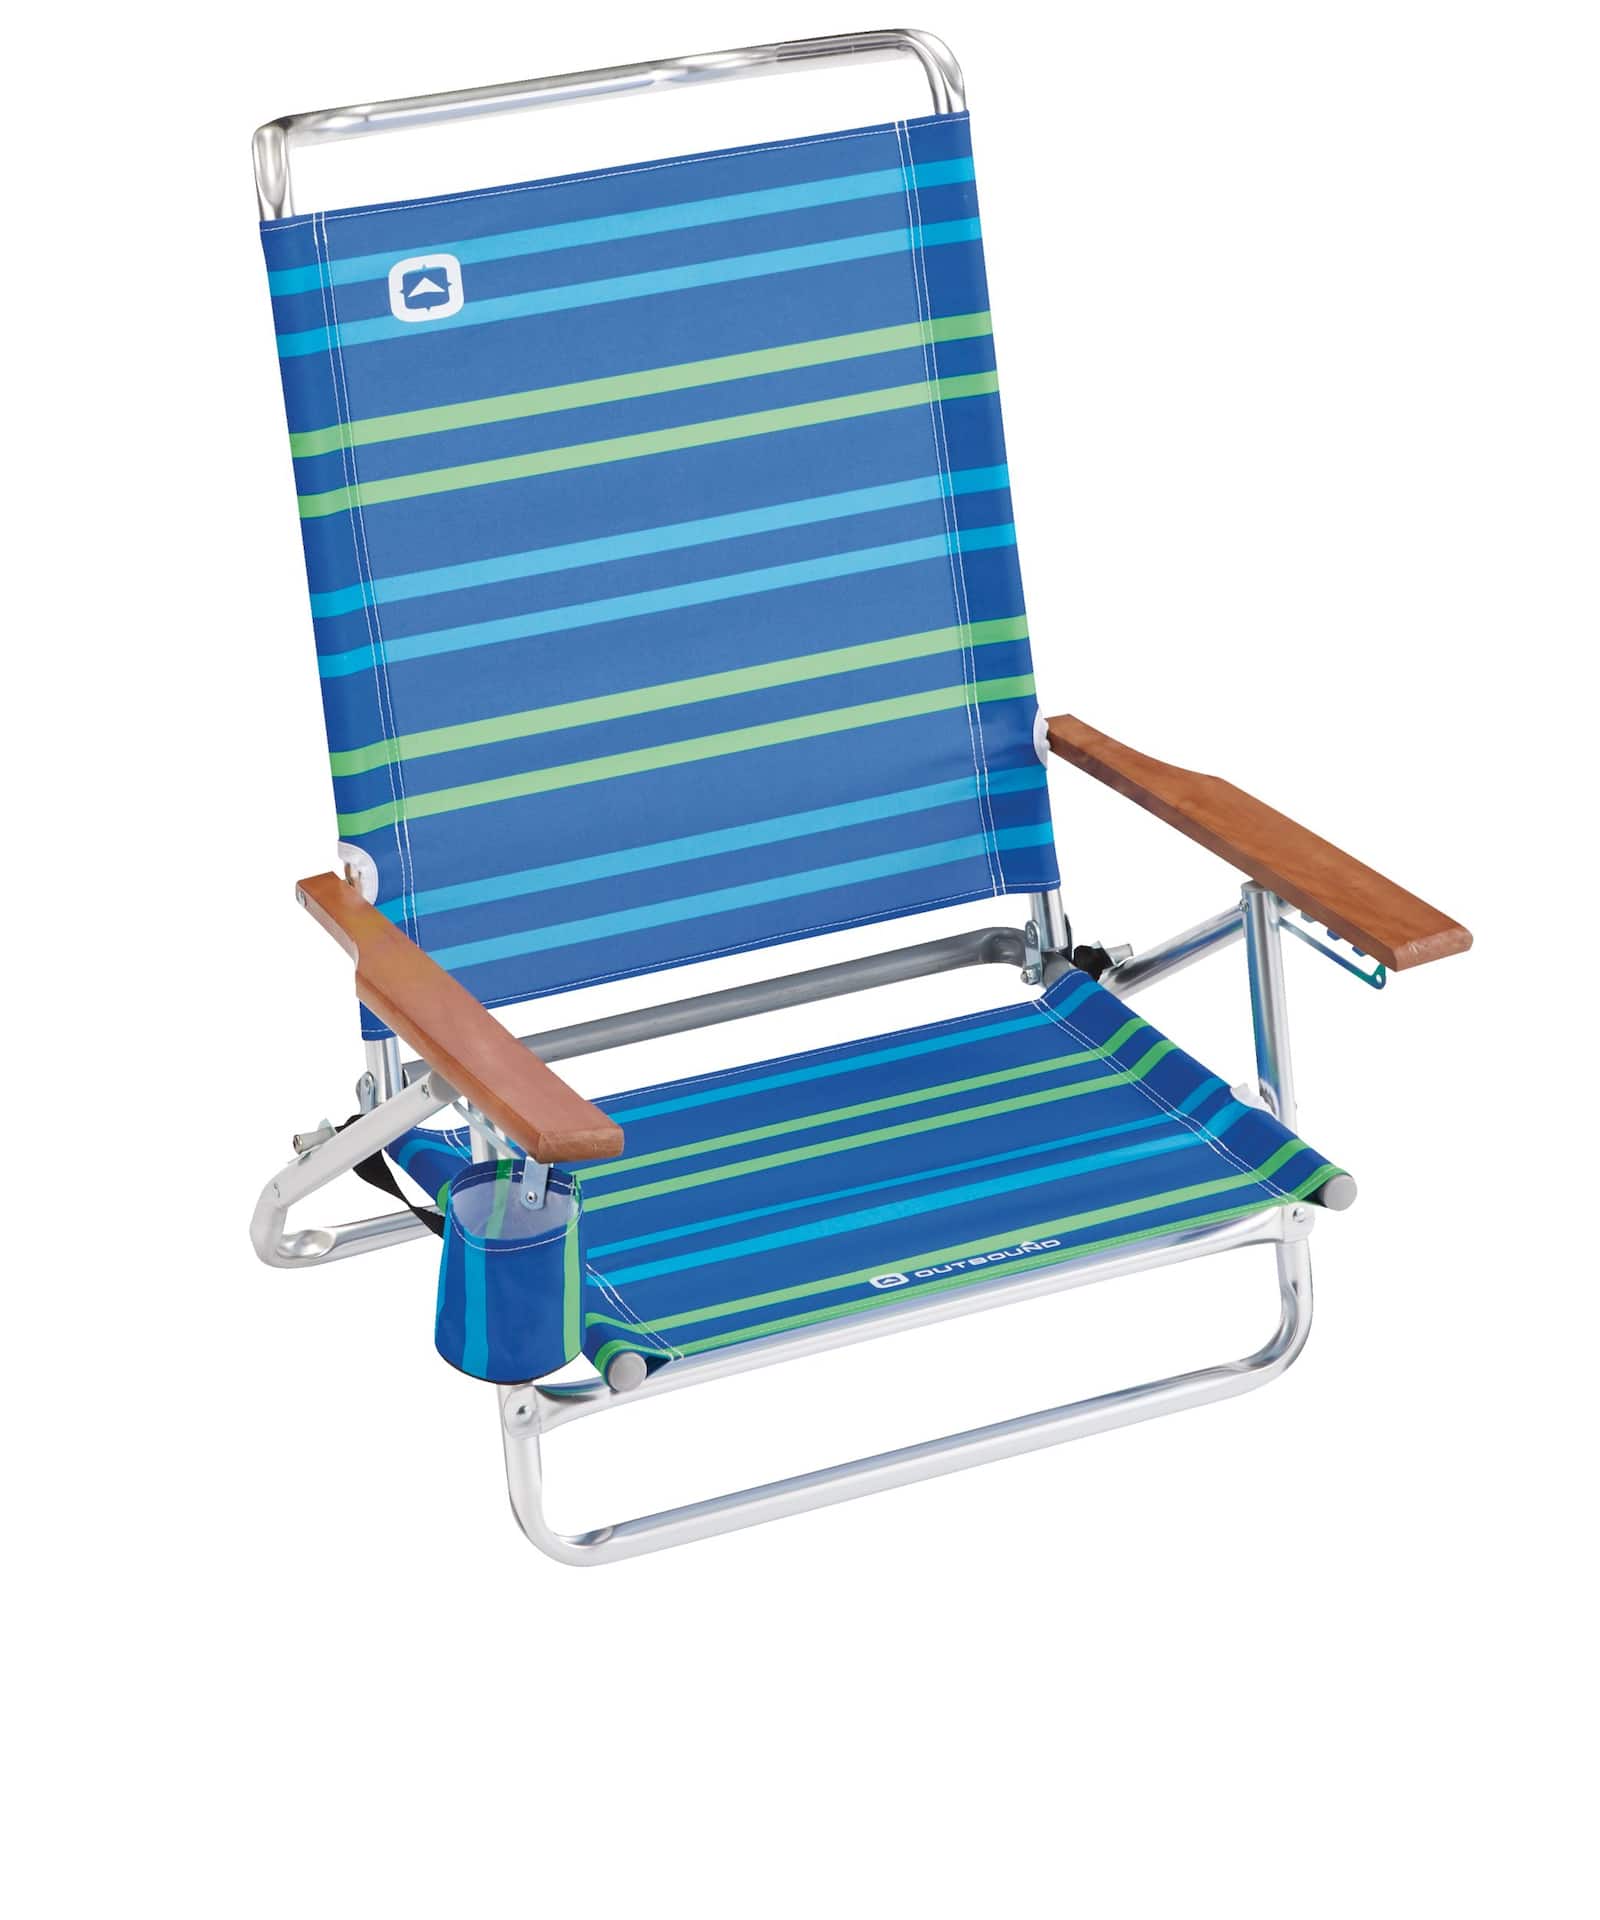 Outdoor Clamp-On Beach Chair Umbrella w/ Universal Clamp For Beach